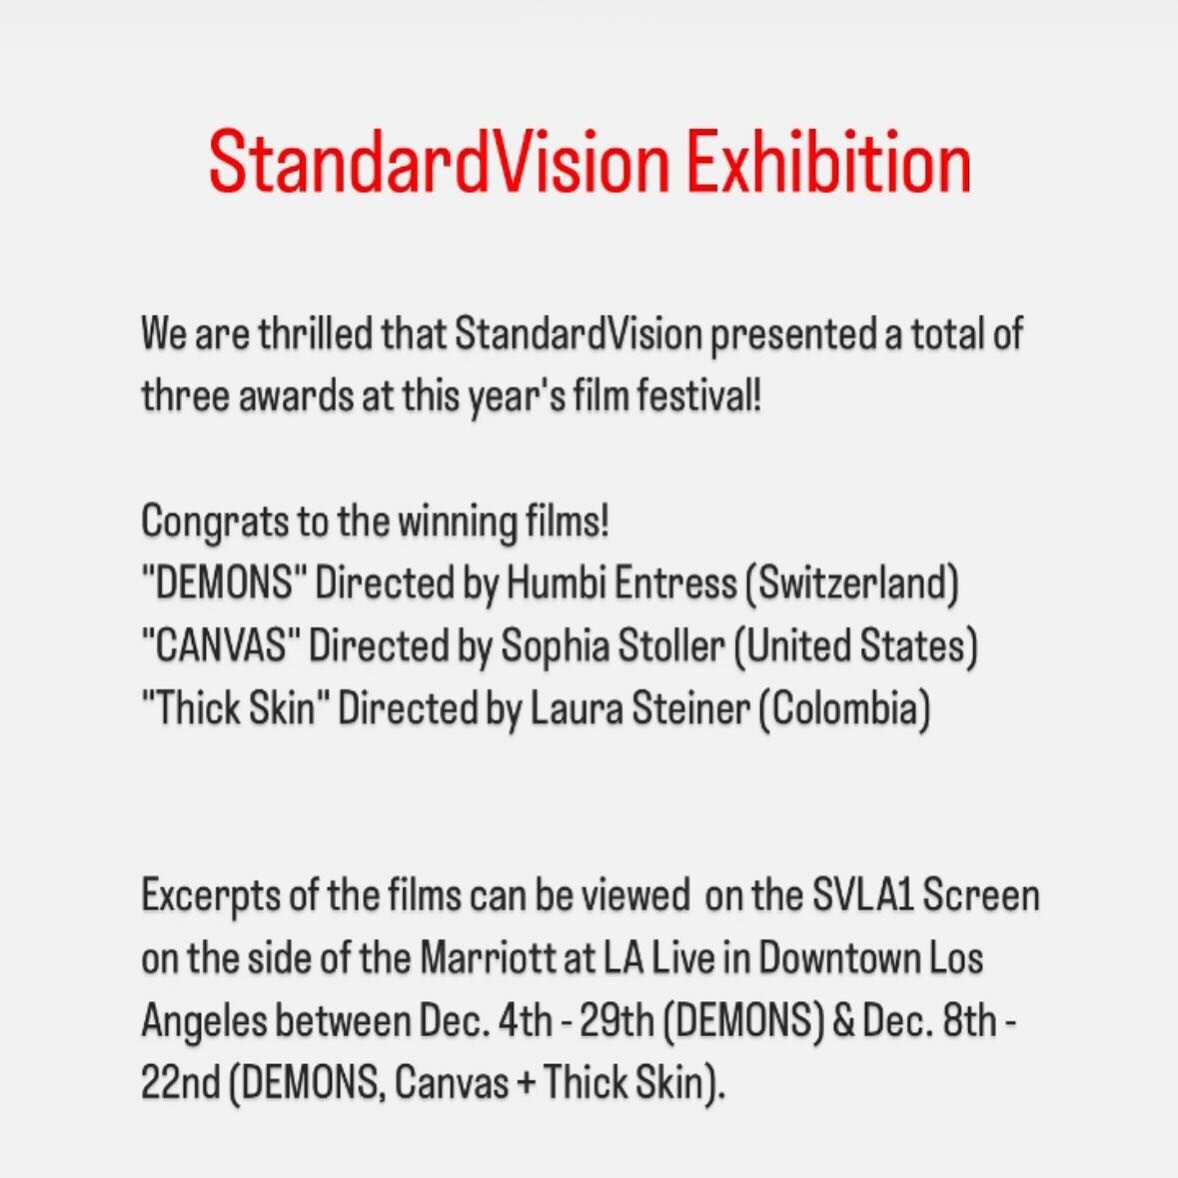 Go check it out if you&rsquo;re in DTLA! 🌇✨

Thank you @standardvision for the amazing opportunity!

.
.
.

#dancefilm #dancefilms #dancefilmfestival #dancefilmfest #danceexhibition #screendance #screendancefestival #cinedance #dtla